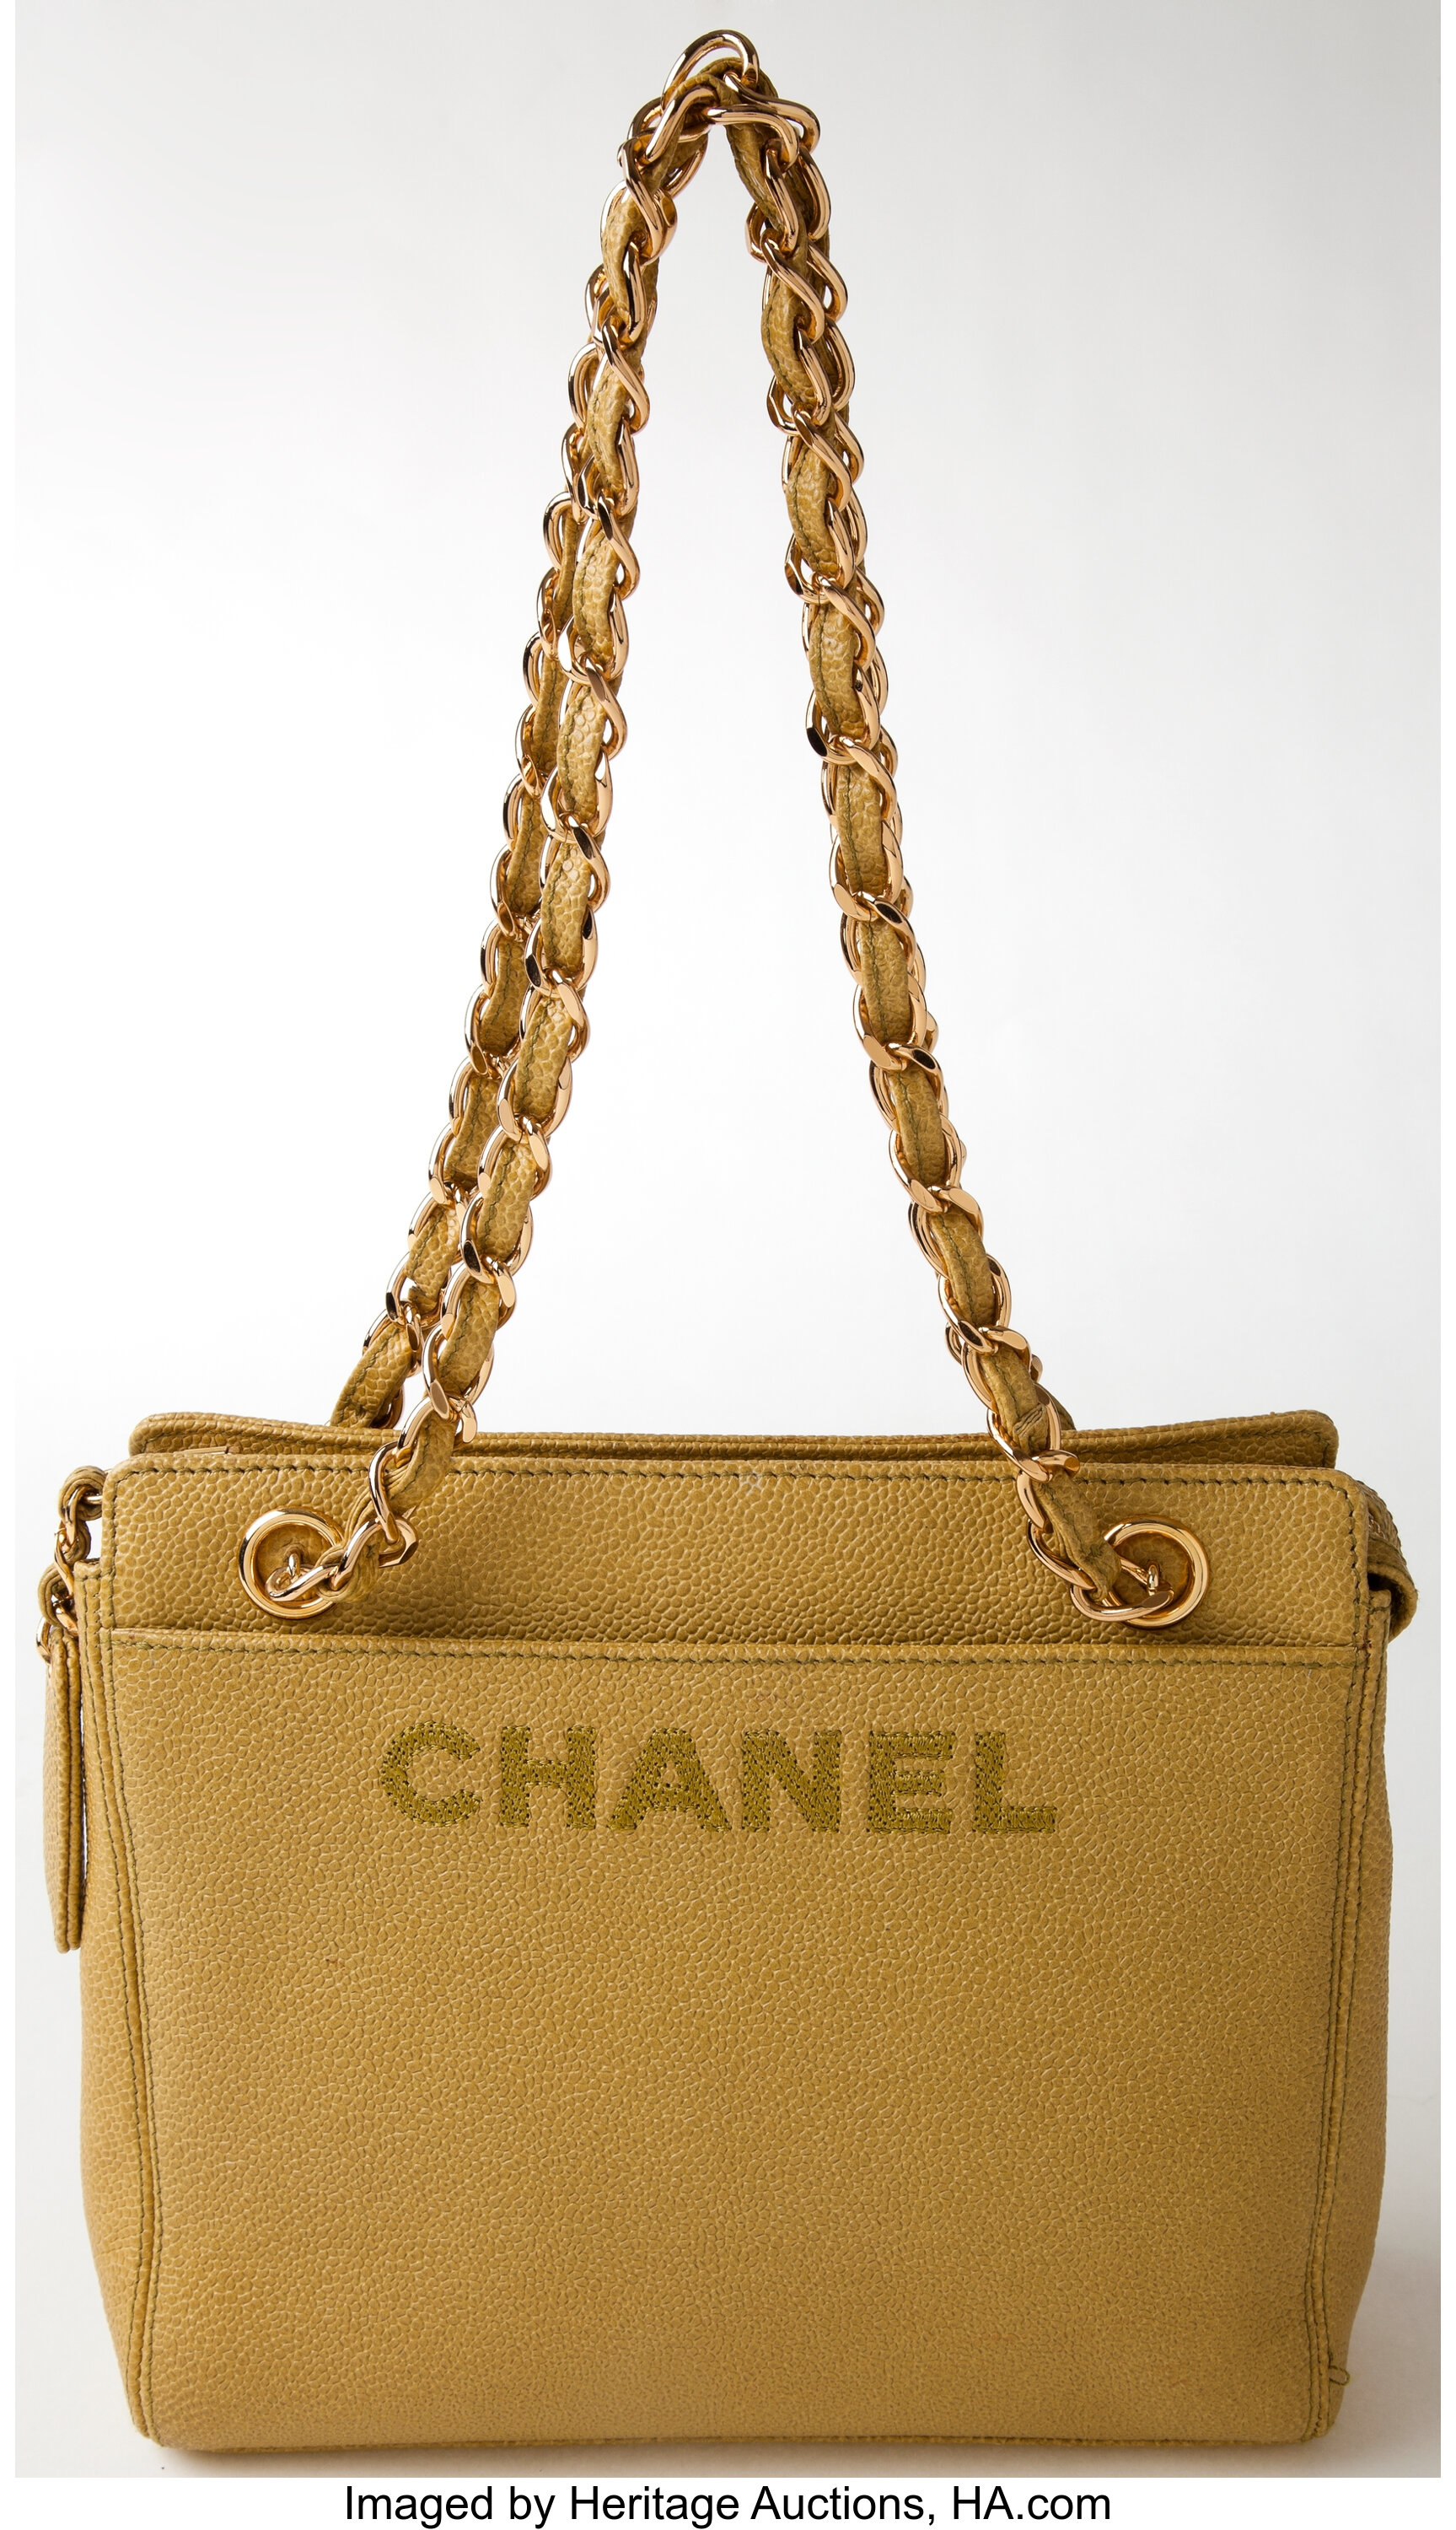 Chanel Vintage Green Caviar Leather Hobo Bucket Shoulder Bag with Golden Chain Strap, Drawstrings, and CC Stitch Mark